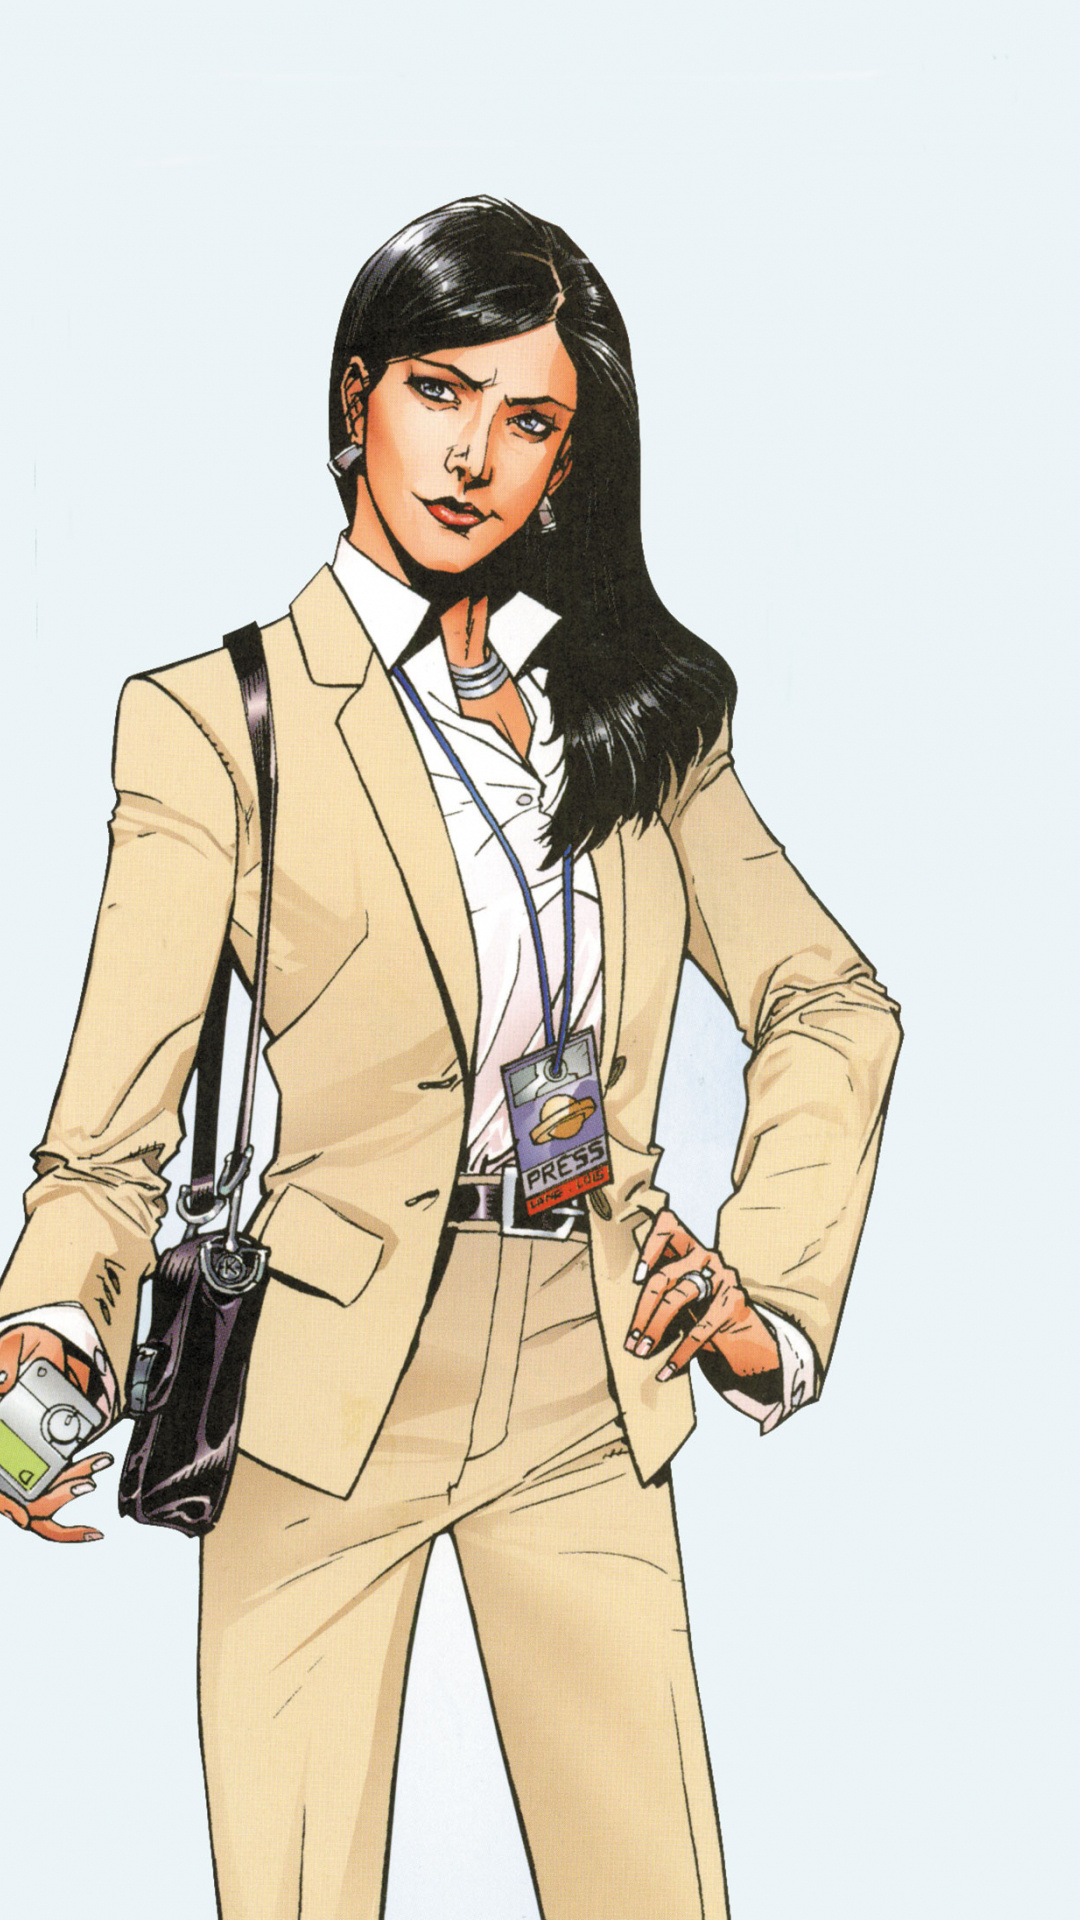 Lois Lane Wallpapers, Comics, HQ, Pictures, 1080x1920 Full HD Handy